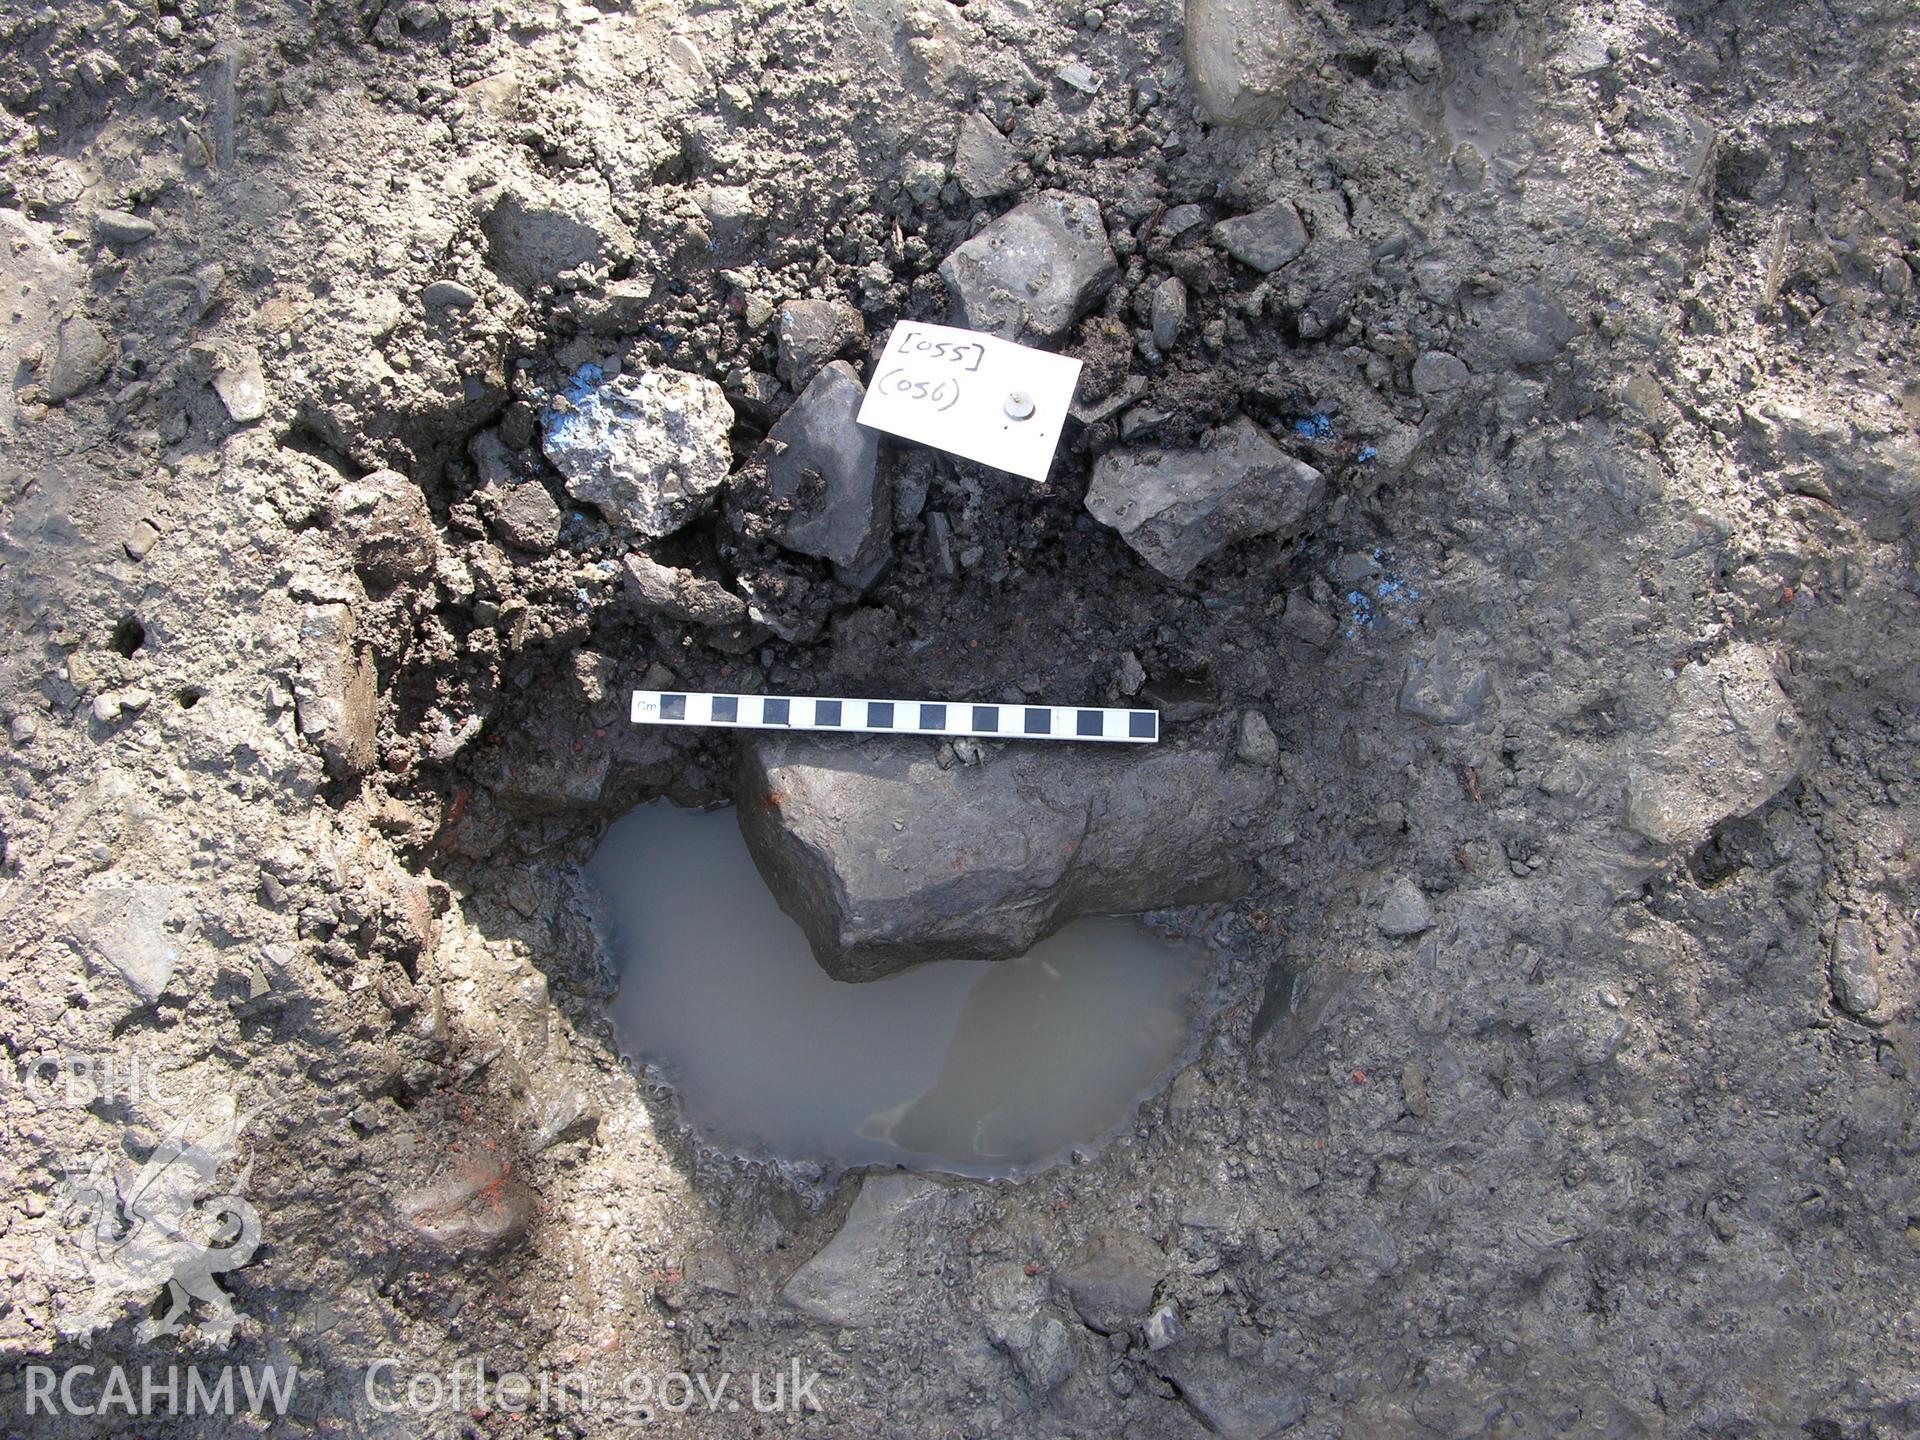 Colour digital photograph showing view of post medieval posthole from southern alignment - part of the Archaeological Excavation report for Horse Yard Farm, Evenjobb (CAP Report 607) by Chris E Smith, from a Cambrian Archaeological Projects assessment survey.